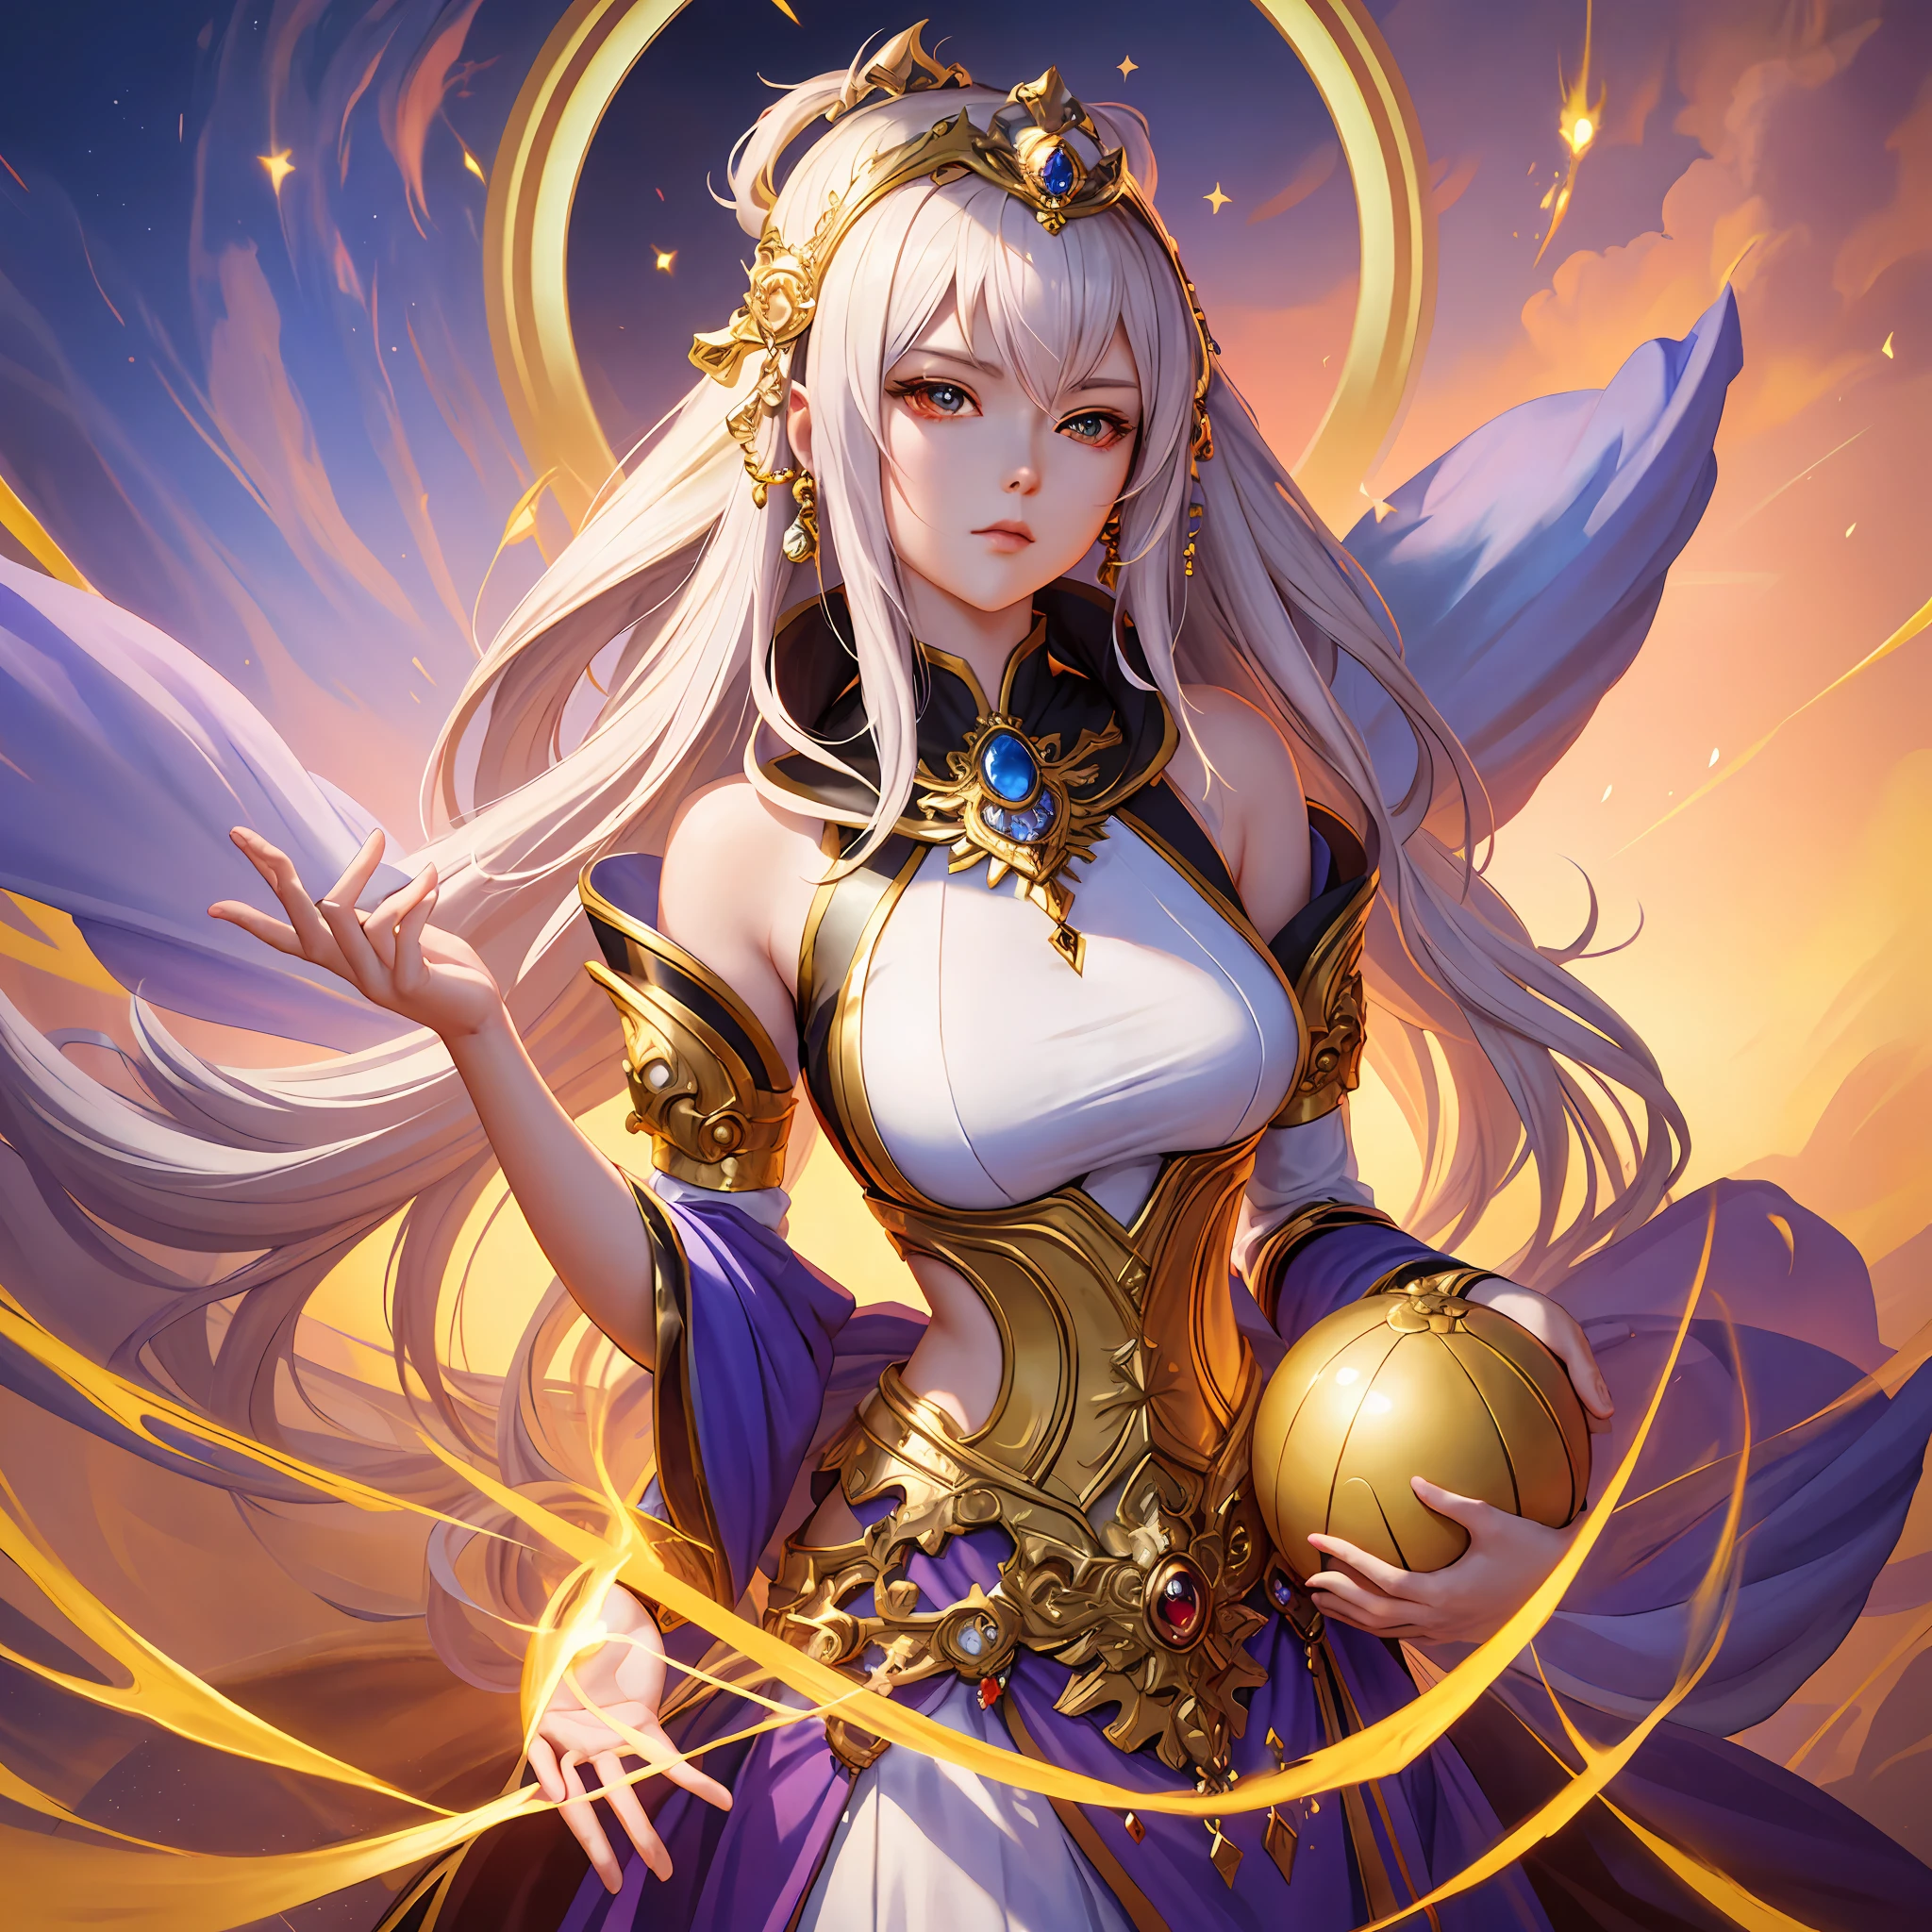 a painting of a woman in a costume holding a ball, a beautiful fantasy empress, extremely detailed artgerm, 8k high quality detailed art, anime goddess, by Yang J, ((a beautiful fantasy empress)), beautiful character painting, style of artgerm, 2. 5 d cgi anime fantasy artwork, artgerm. anime illustration